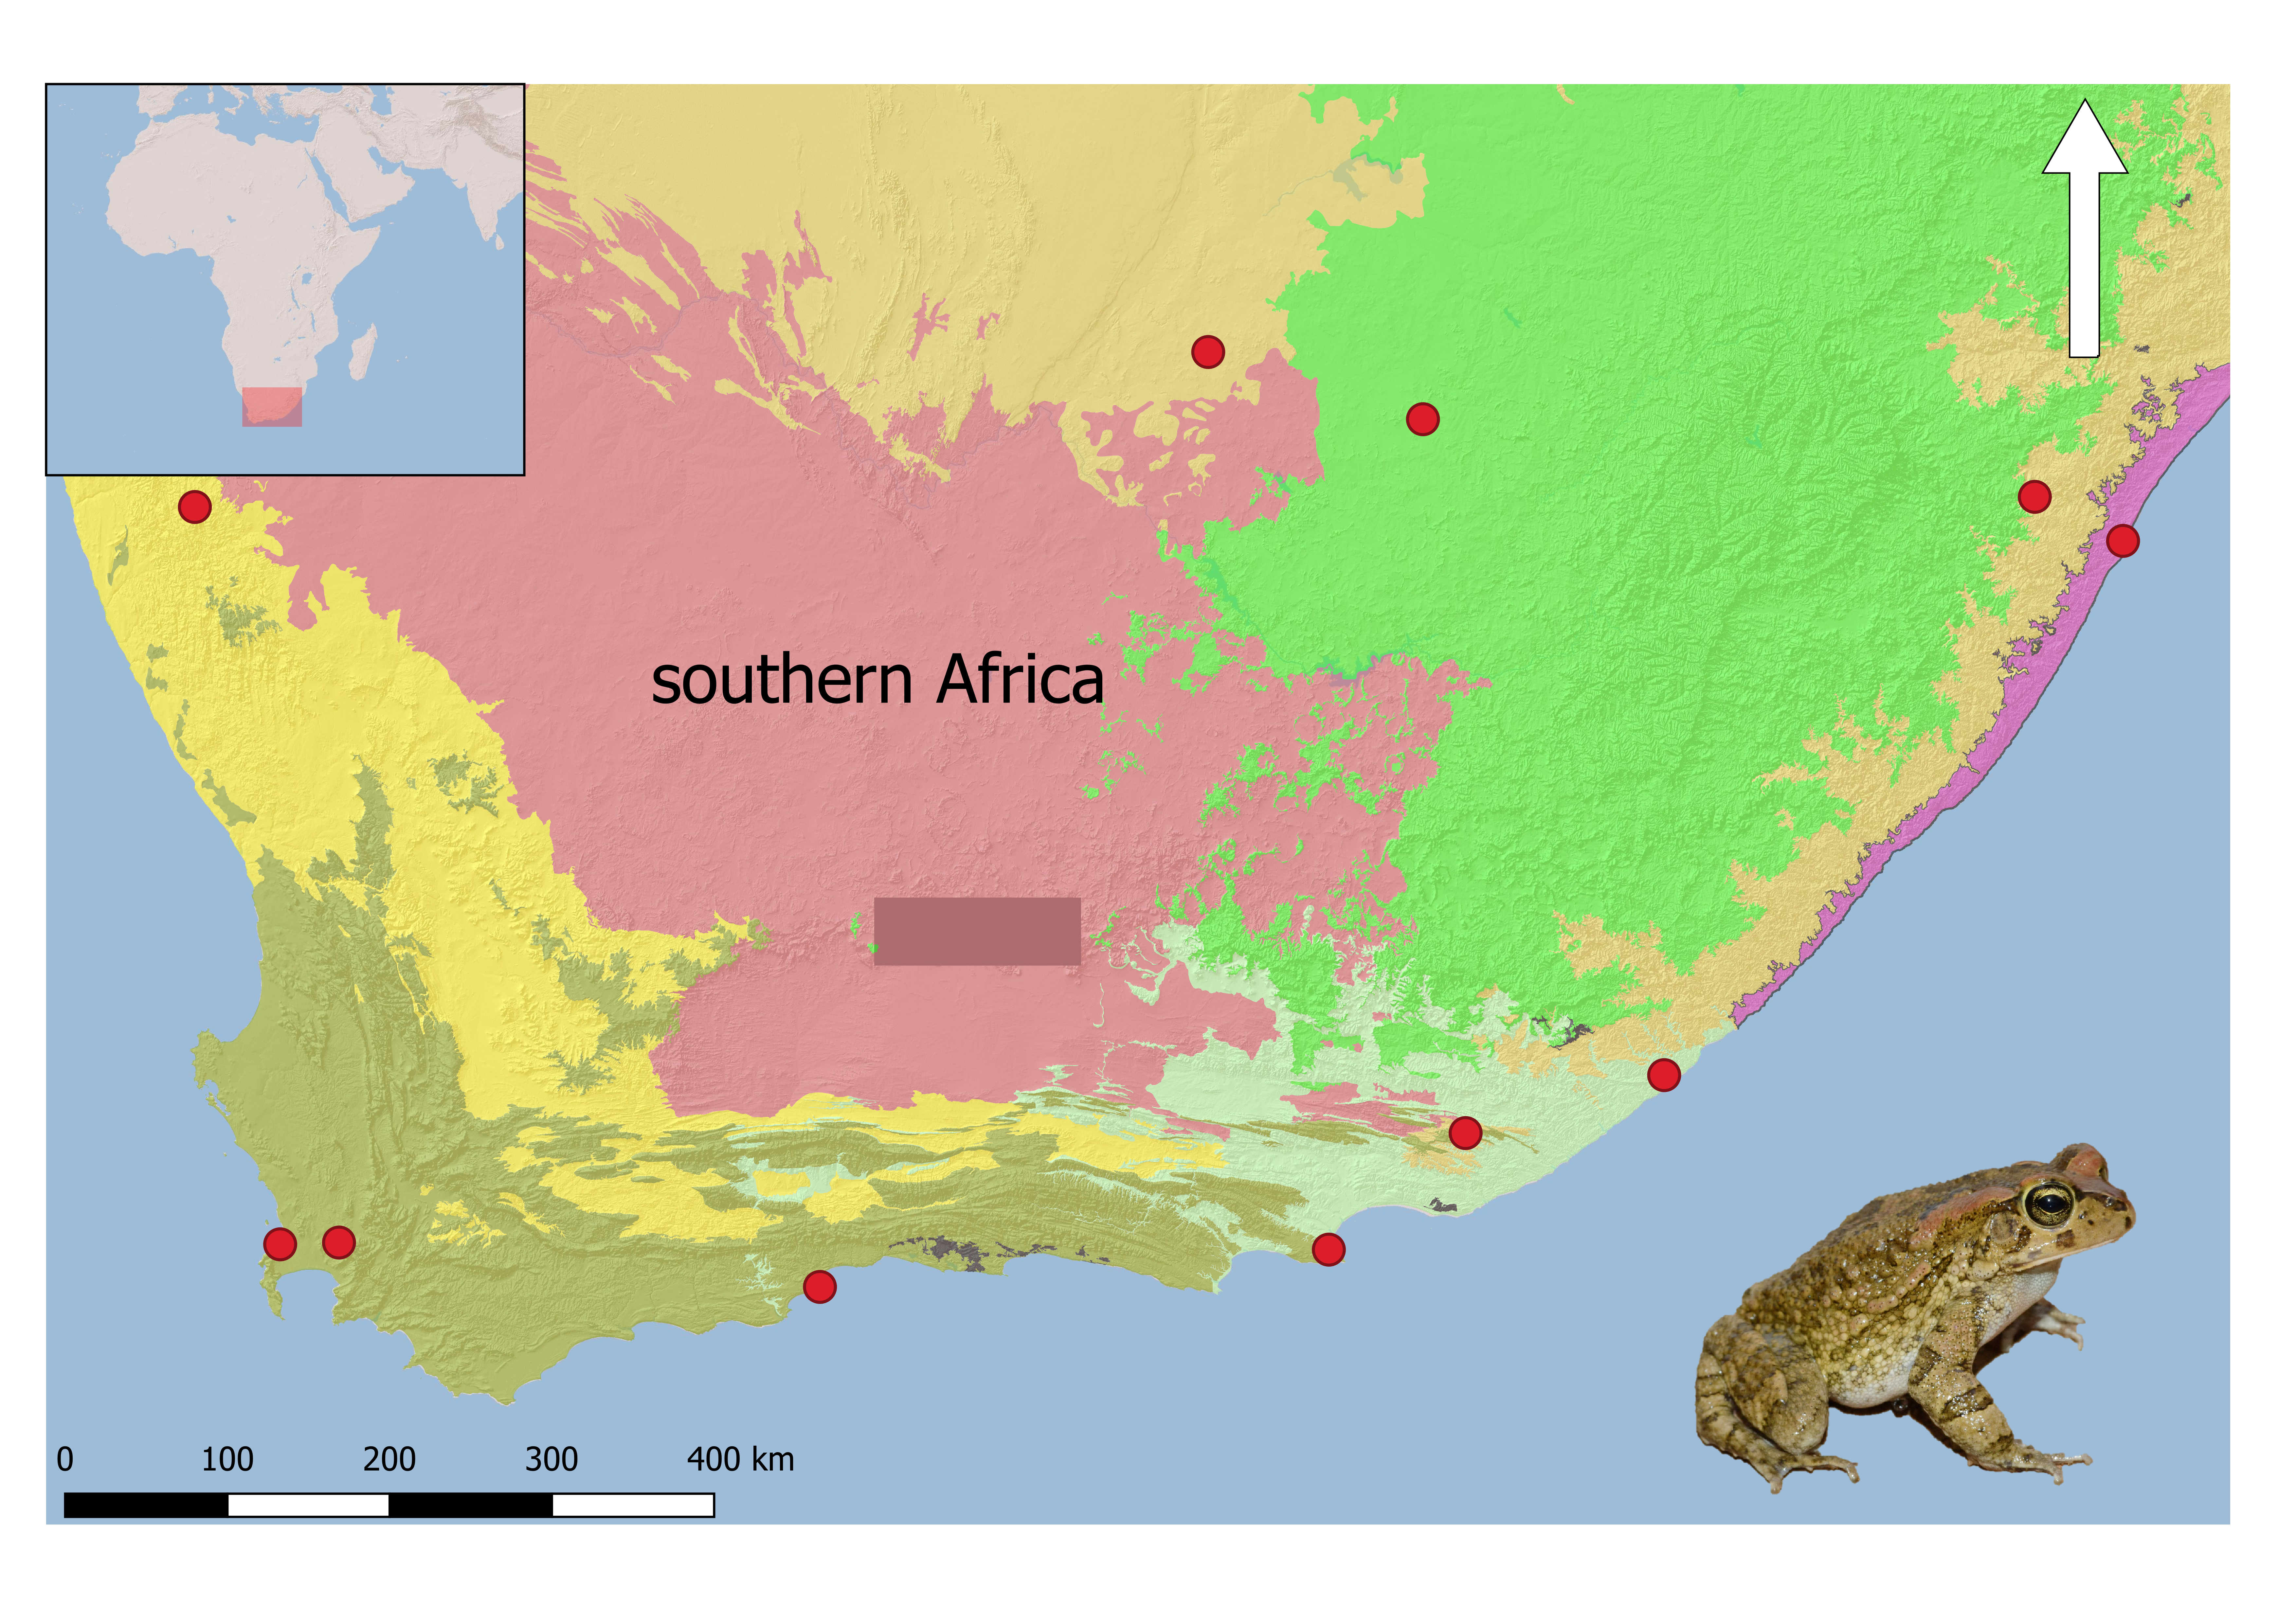 Maps tend to have a lot of space, and GIS provides the opportunity to add layers to give rich information, as well as improving aesthetics. This map shows lots more information about the biomes in which each of the sample sites (red dots) falls, the elevation and an image of the species sampled. The inset of Africa (top left) shows the area sampled with a red square. I’ve also managed to fit in an image of the species sampled into the sea (bottom right).